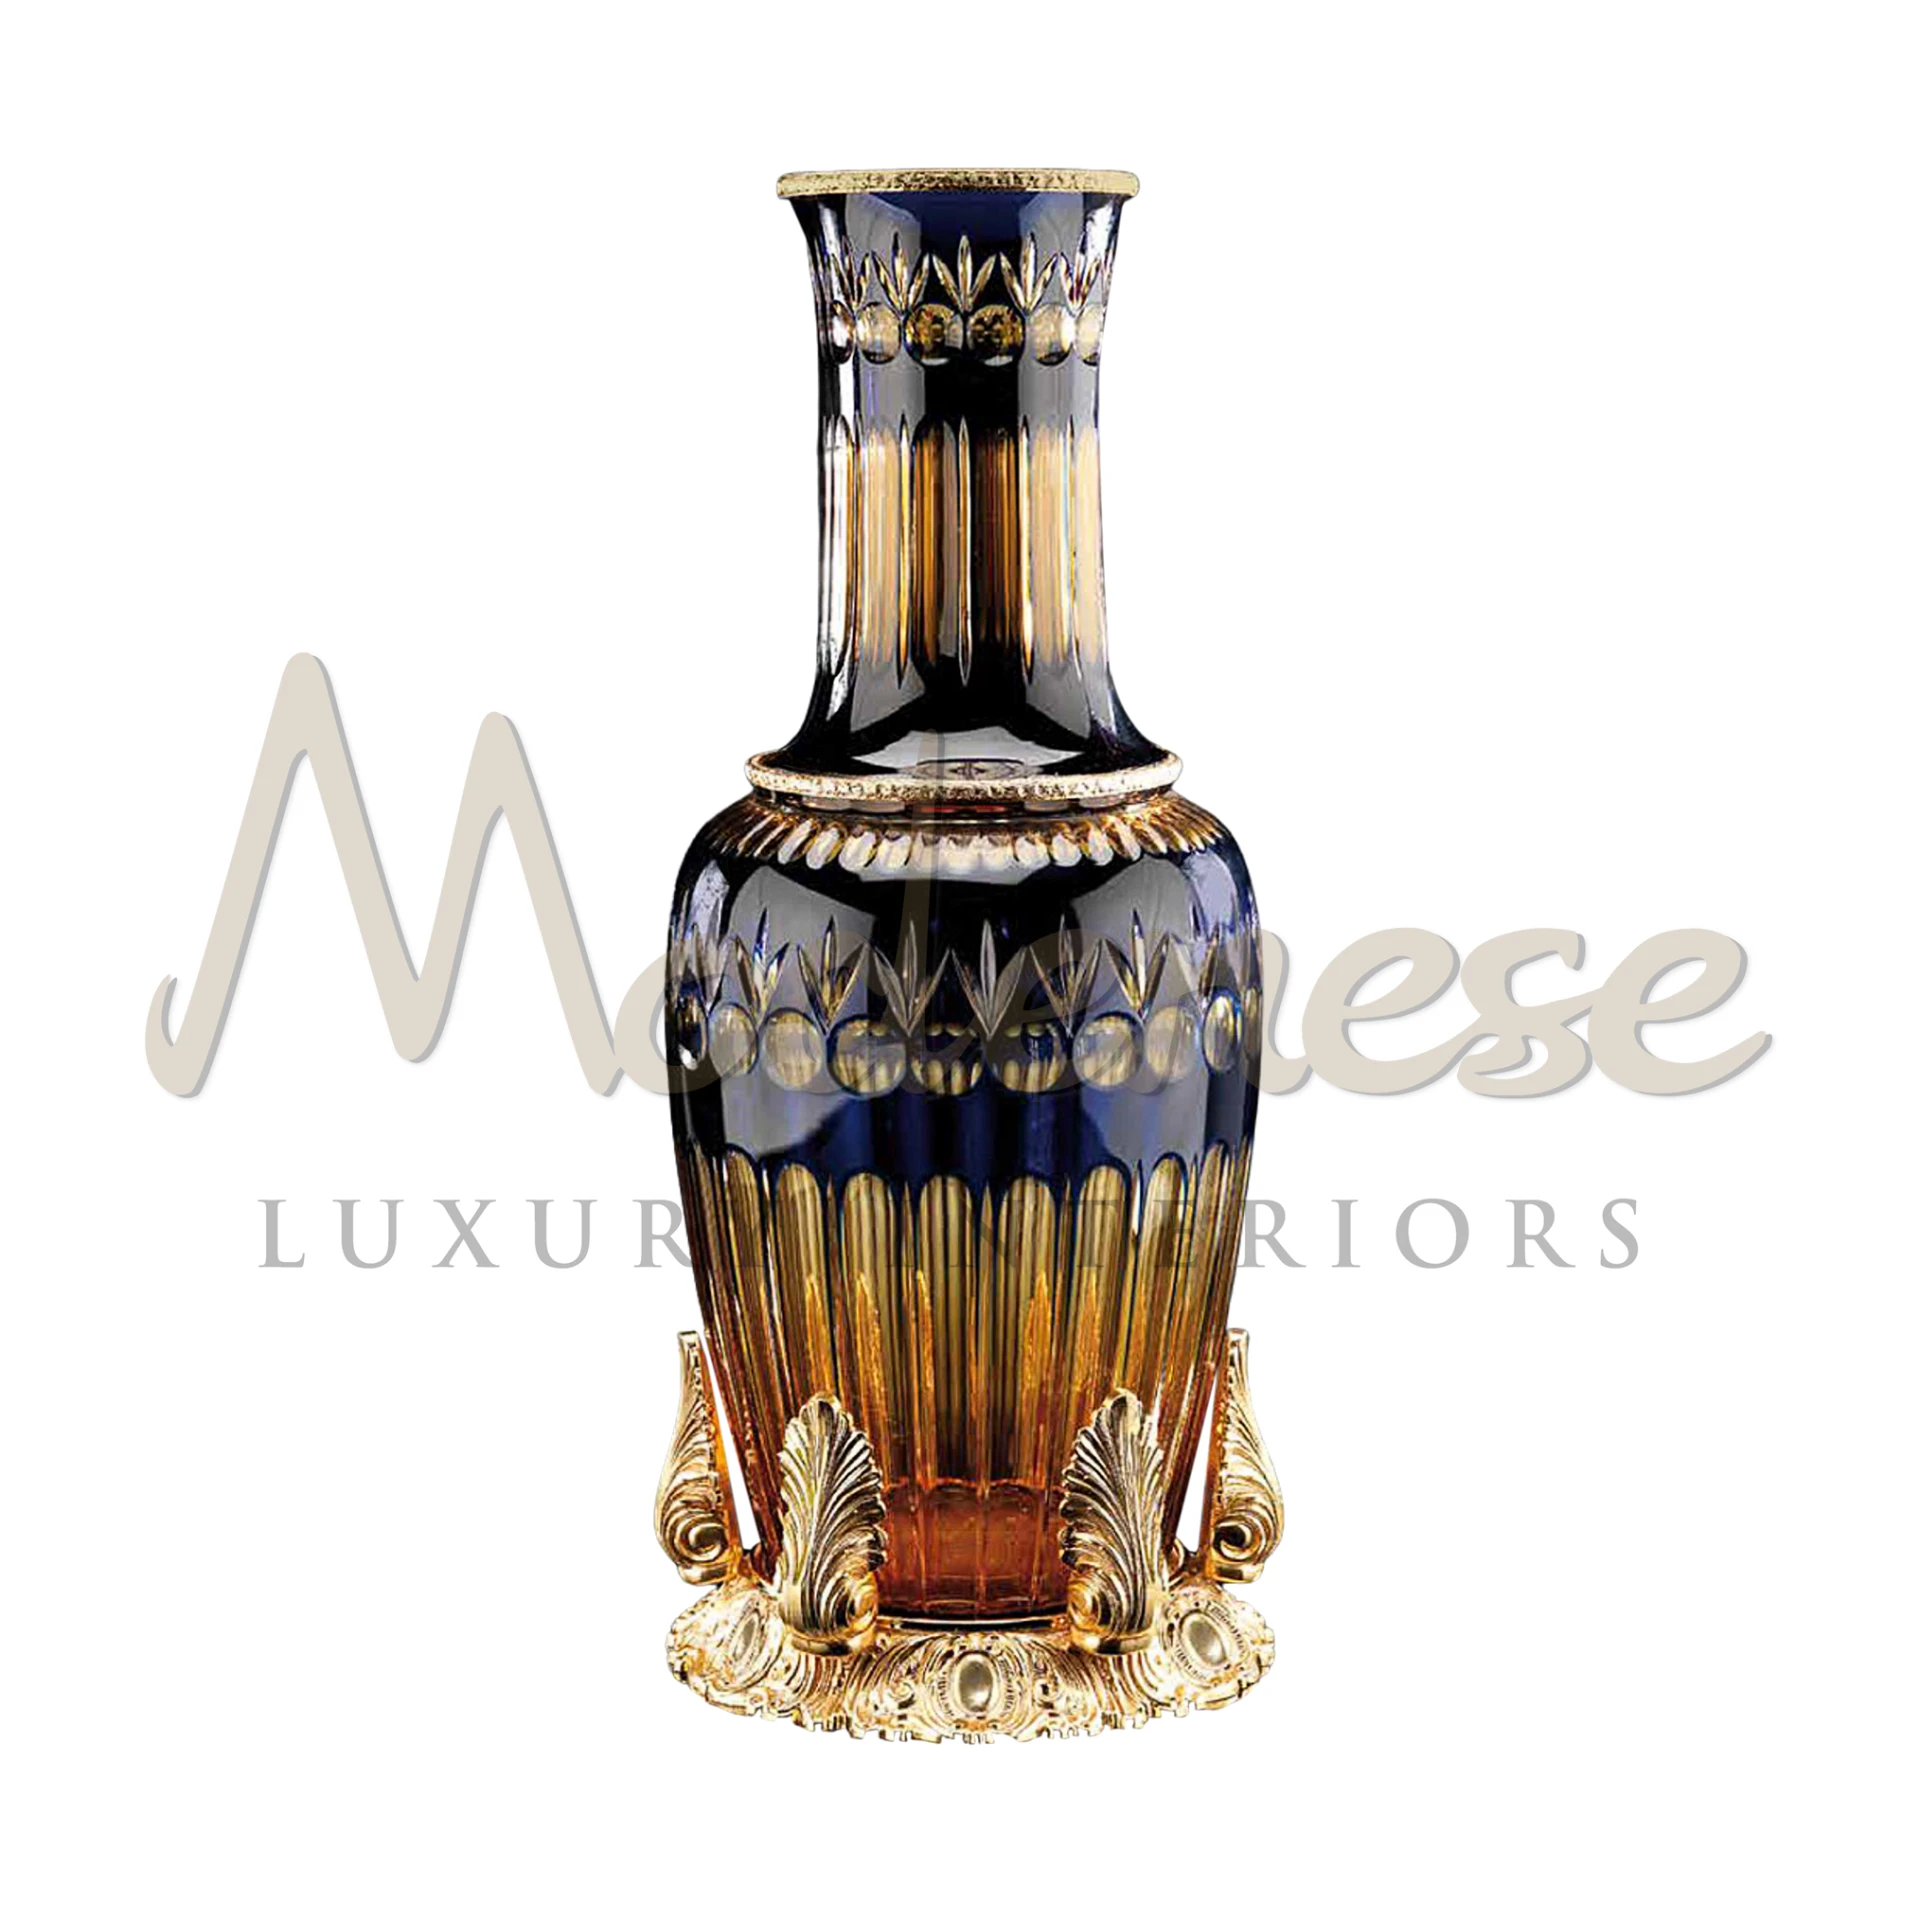 Traditional Luxury Tall Vase by Modenese Furniture, a symbol of opulence and elegance for classic luxury interiors.